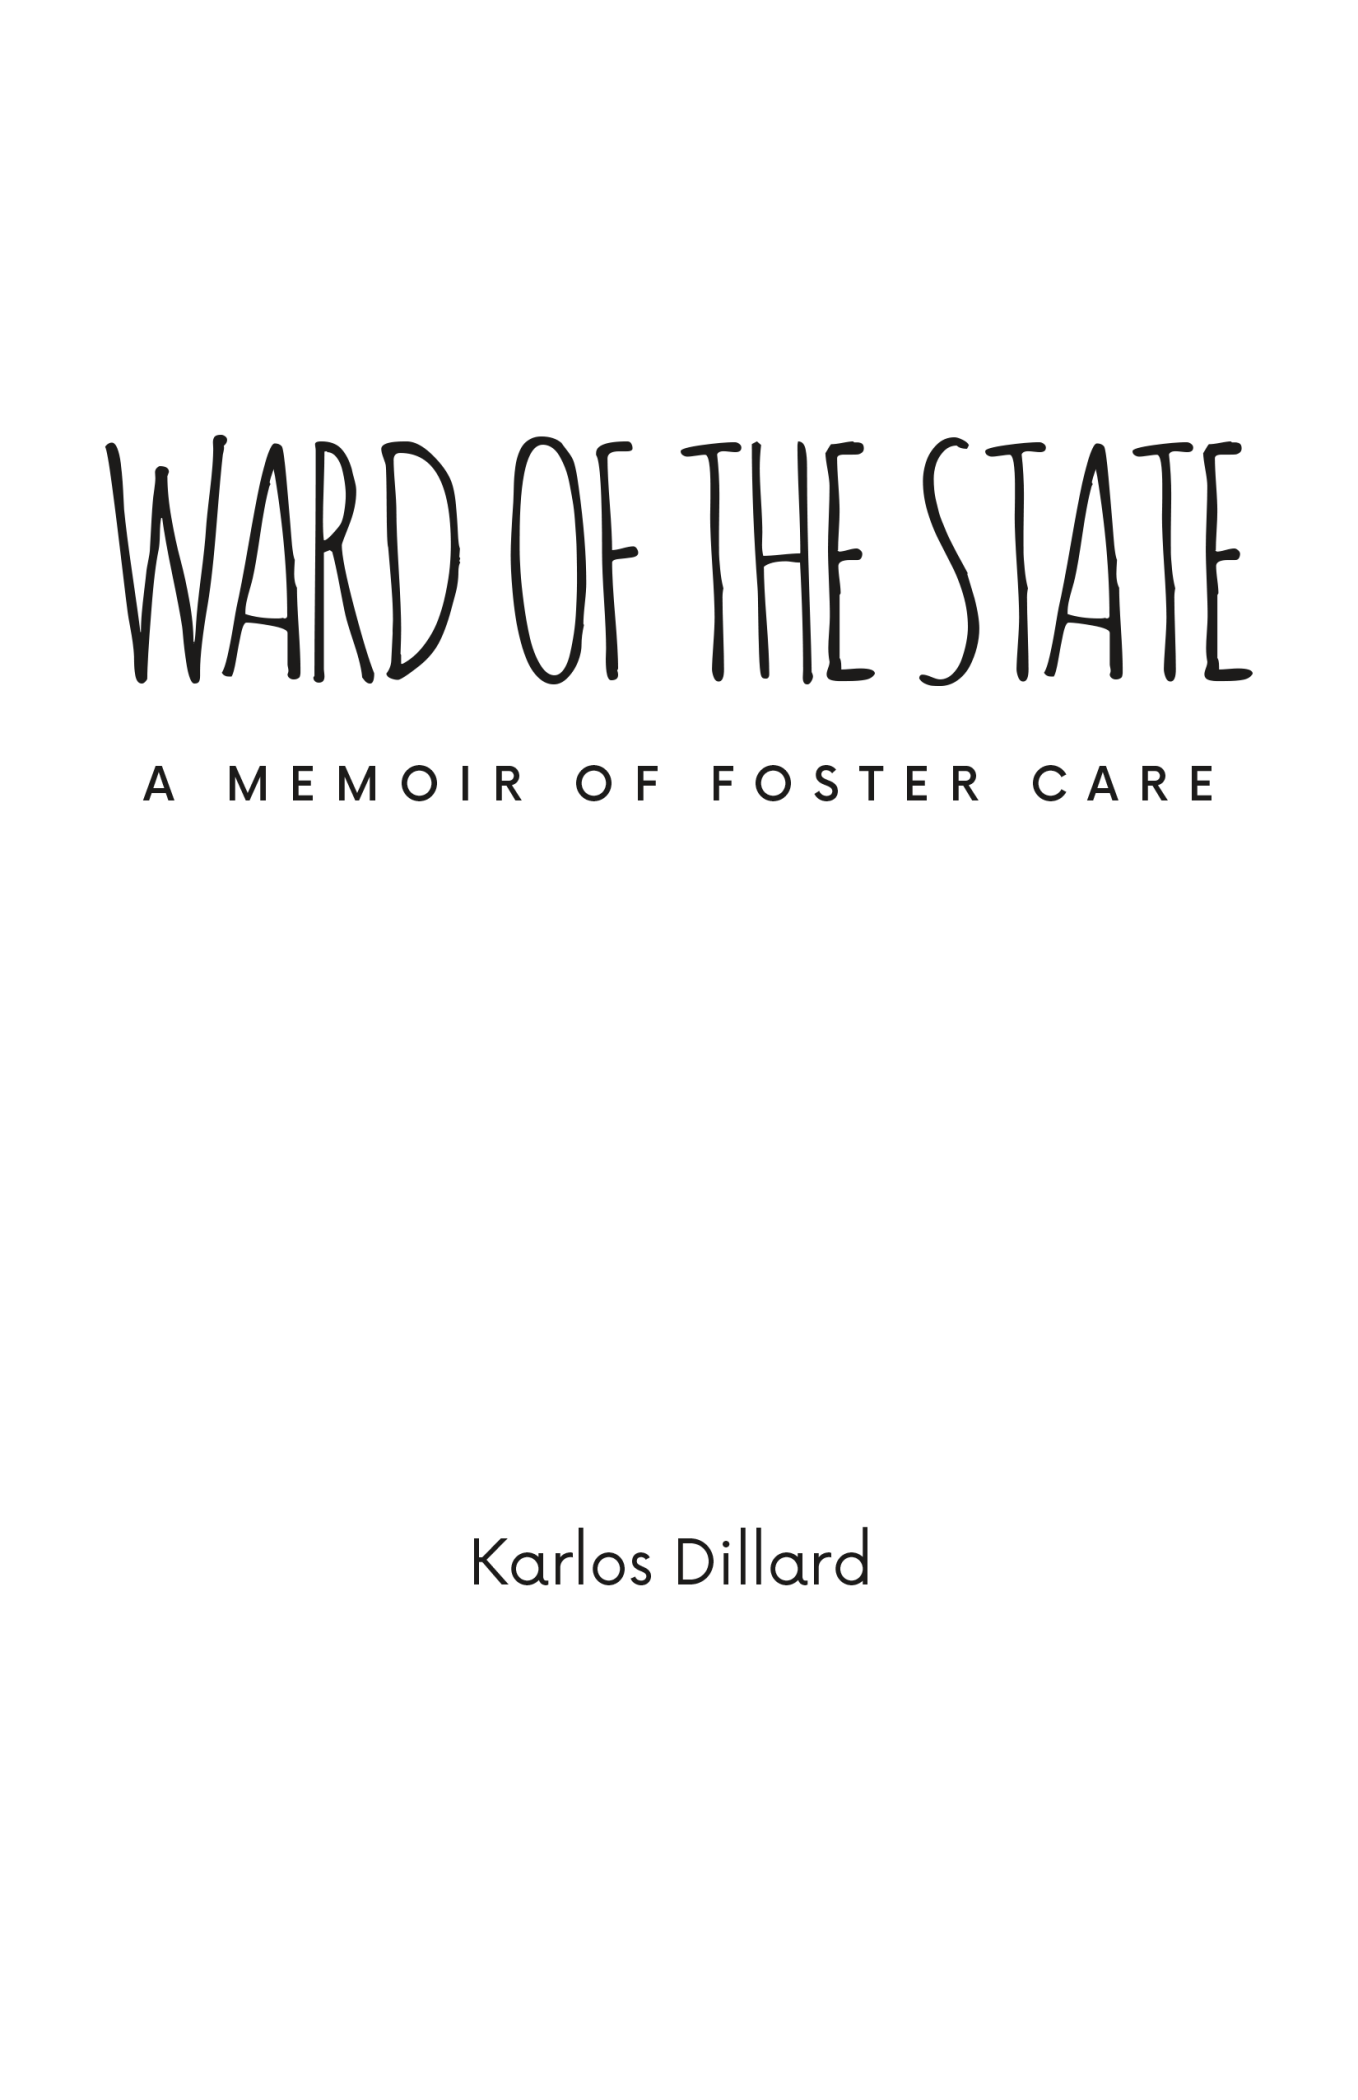 Ward of the State Subtitle 2020 by Karlos Dillard All rights reserved This - photo 2